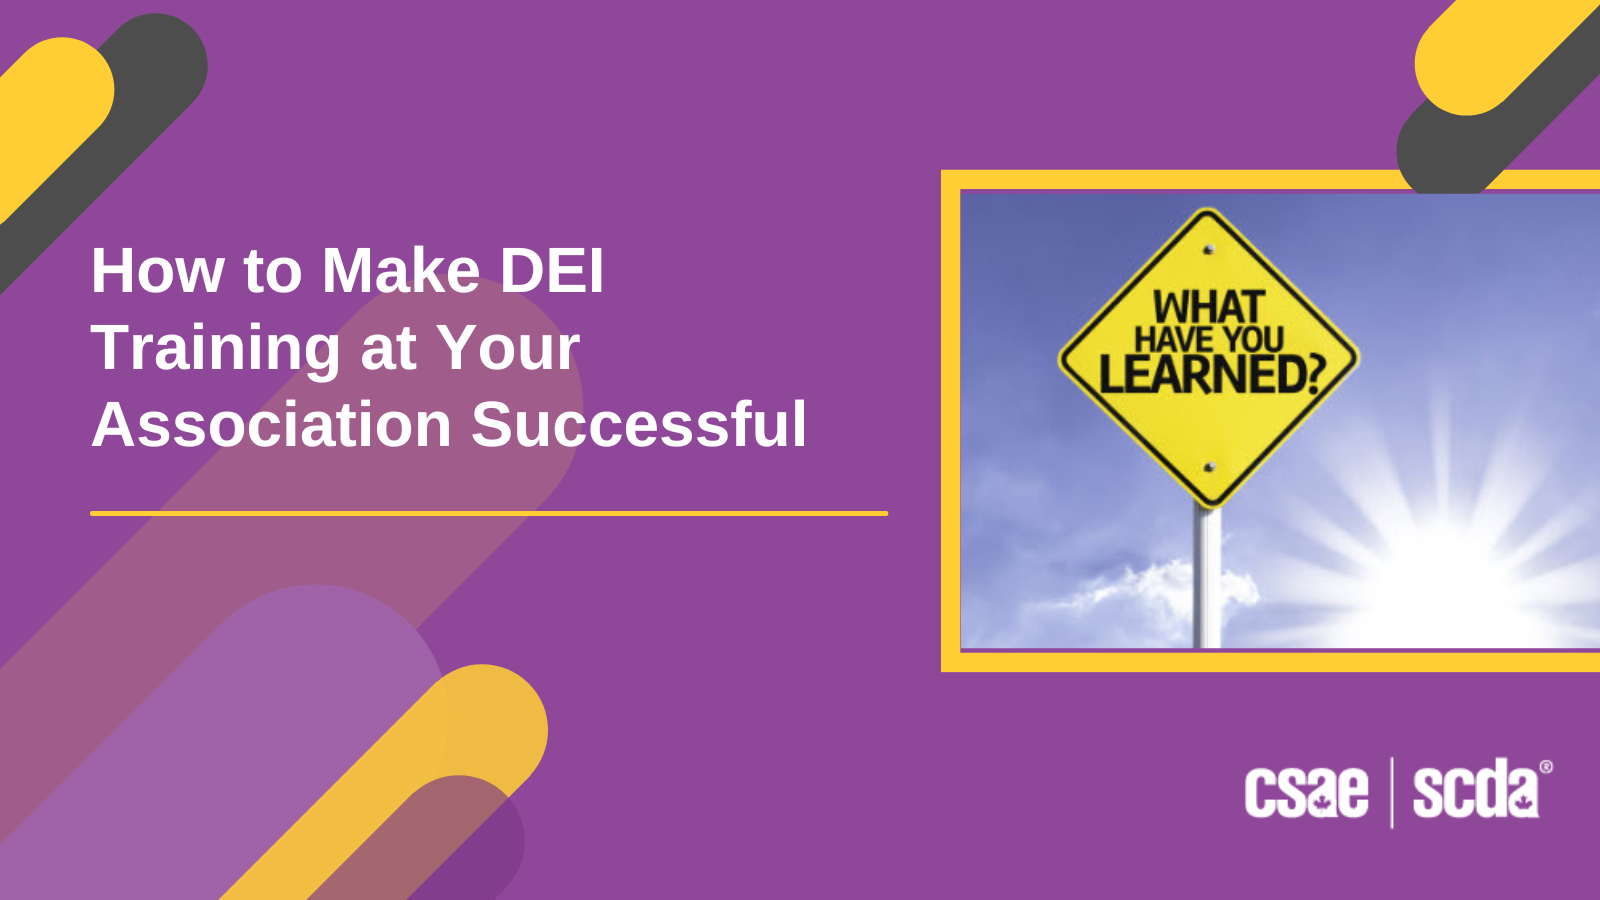 How to Make DEI Training at Your Association Successful